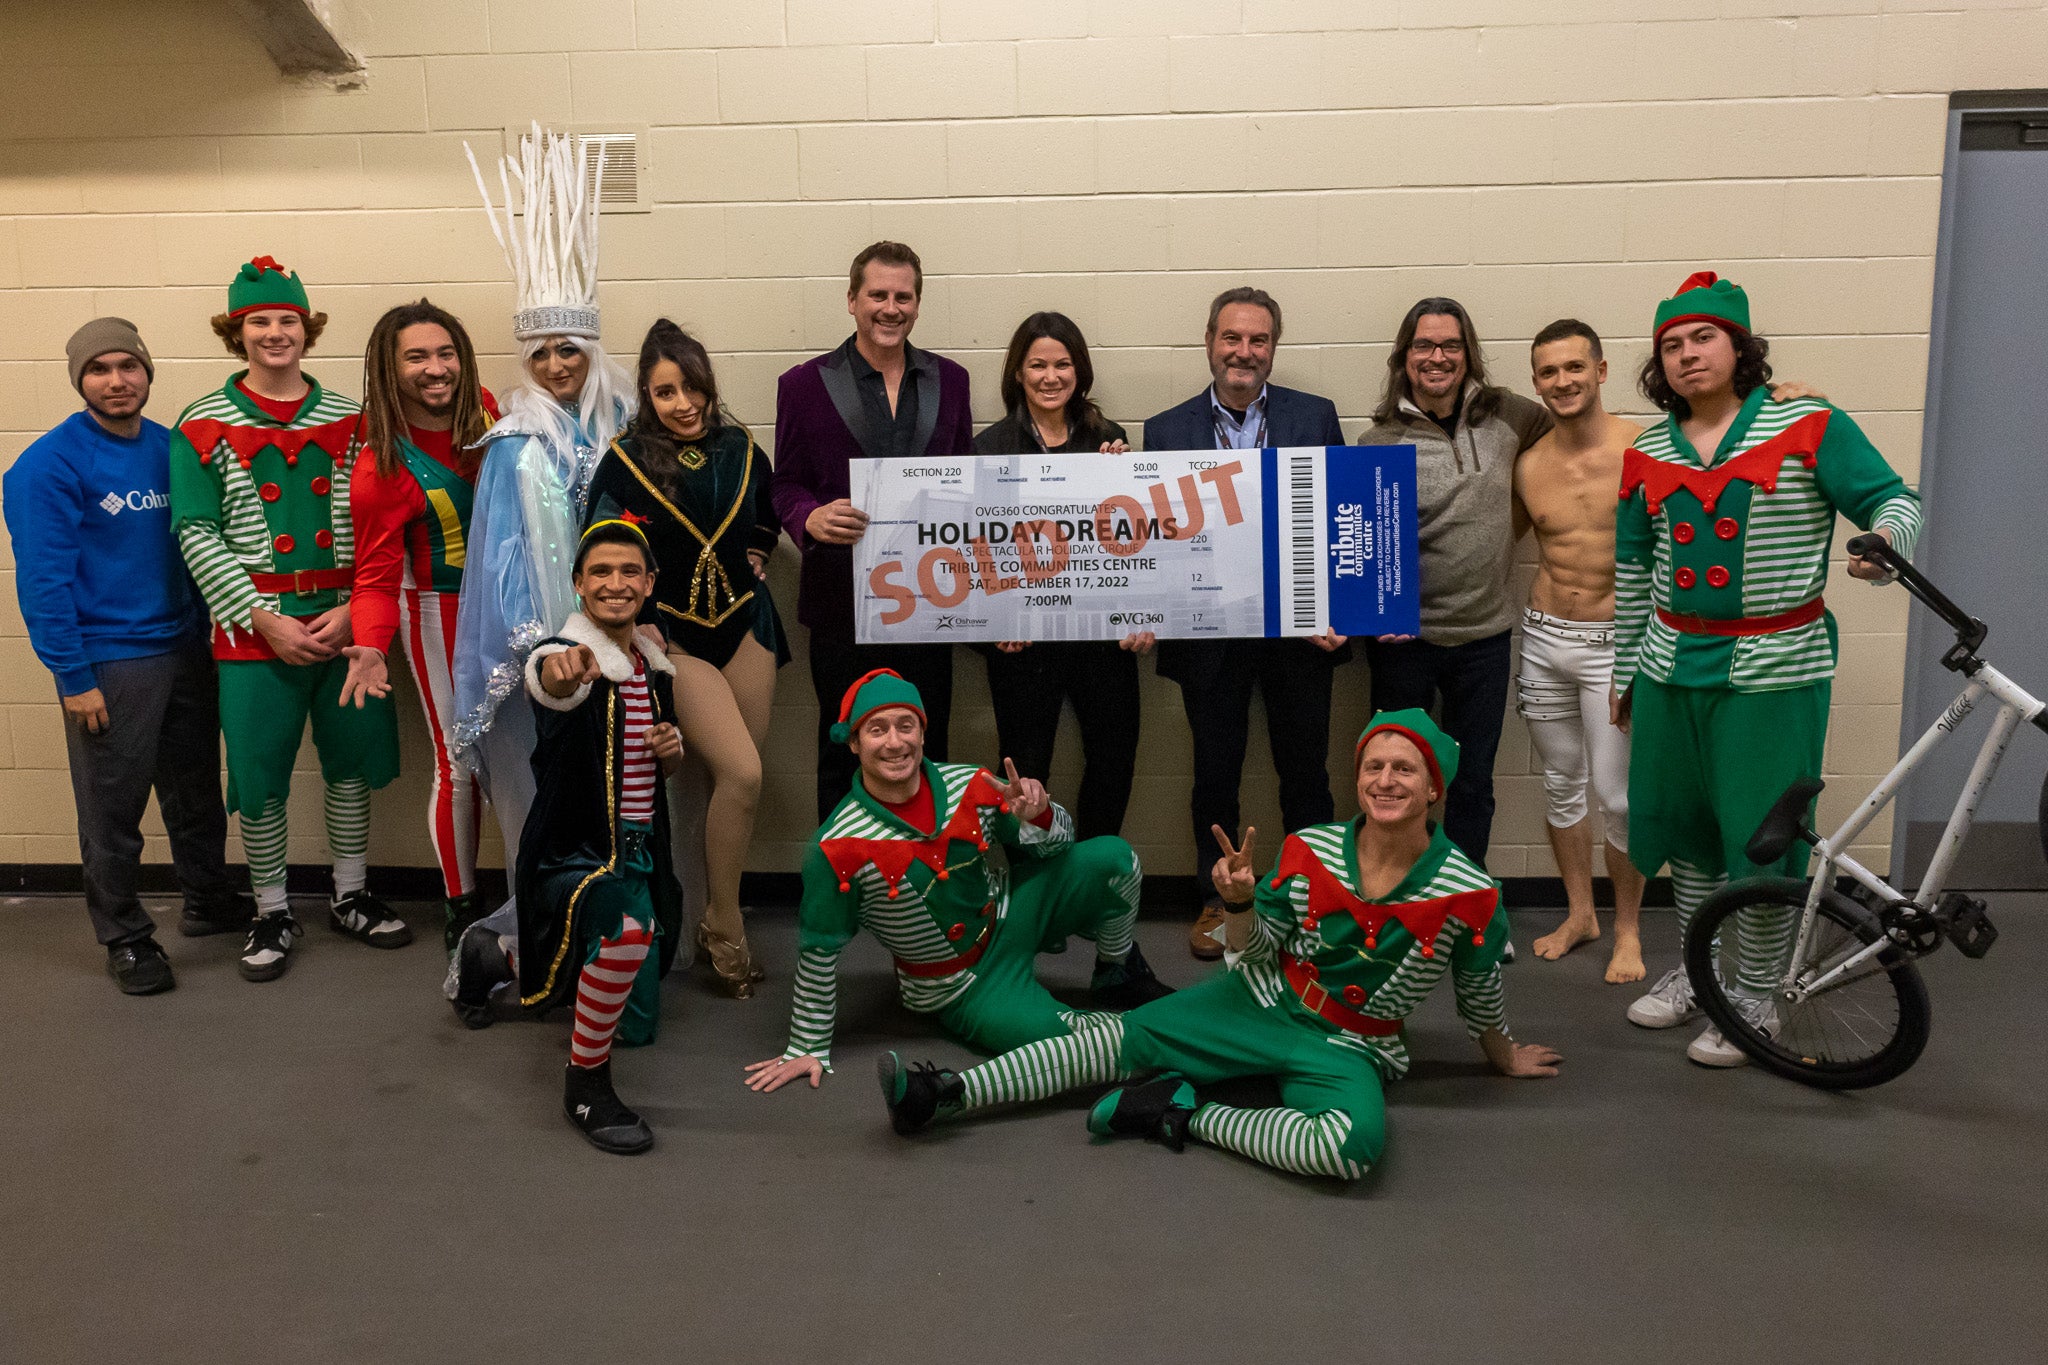 Holiday Dreams, A Spectacular Holiday Cirque Sold Out Performance